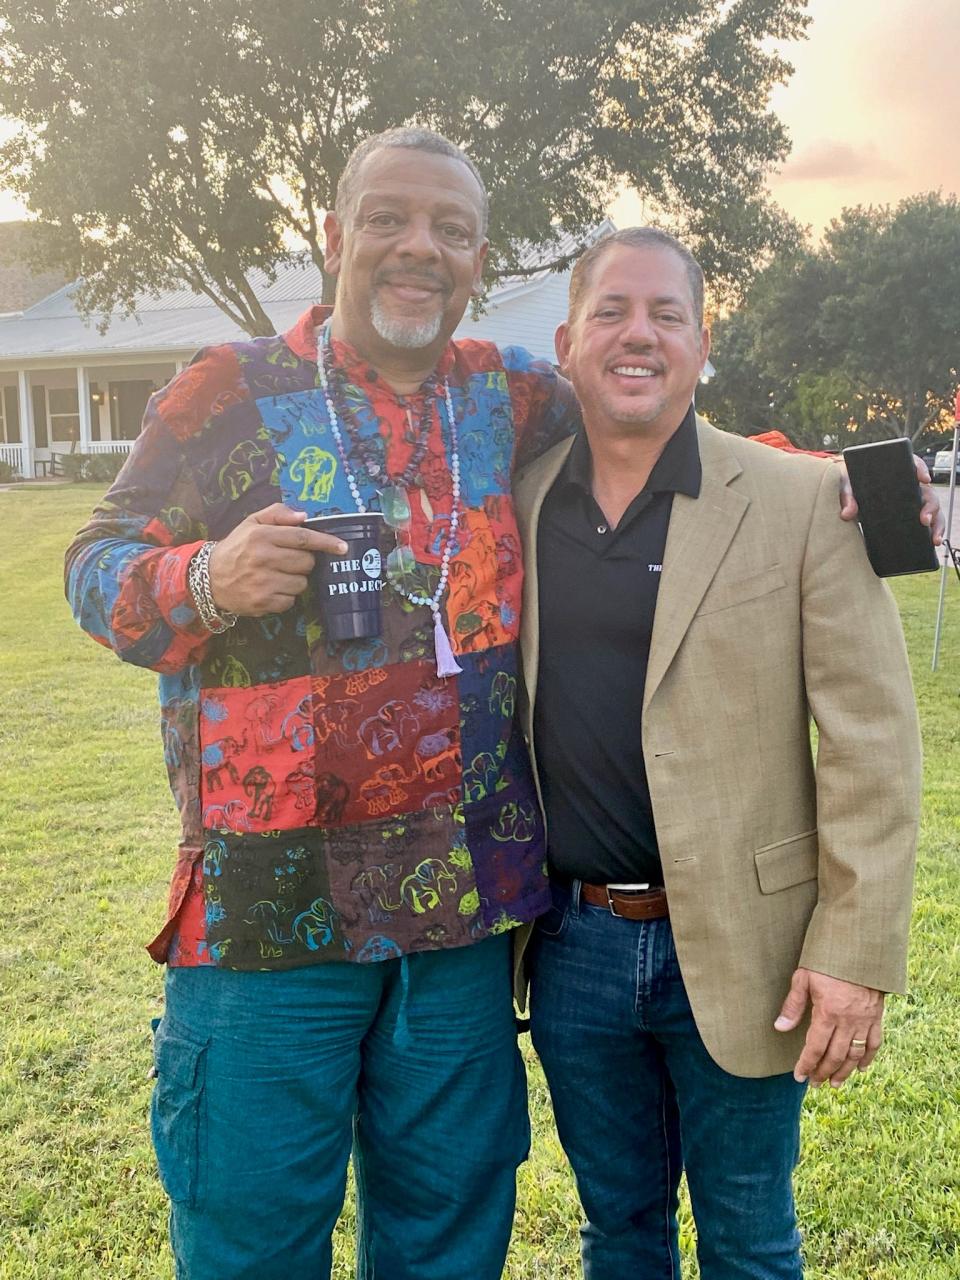 Anthony Scaife (l) is a Navy Veteran who benefited from hyperbaric oxygen treatment funded by The 22 Project. Scaife is standing with Alex Cruz, co-founder of The 22 Project.